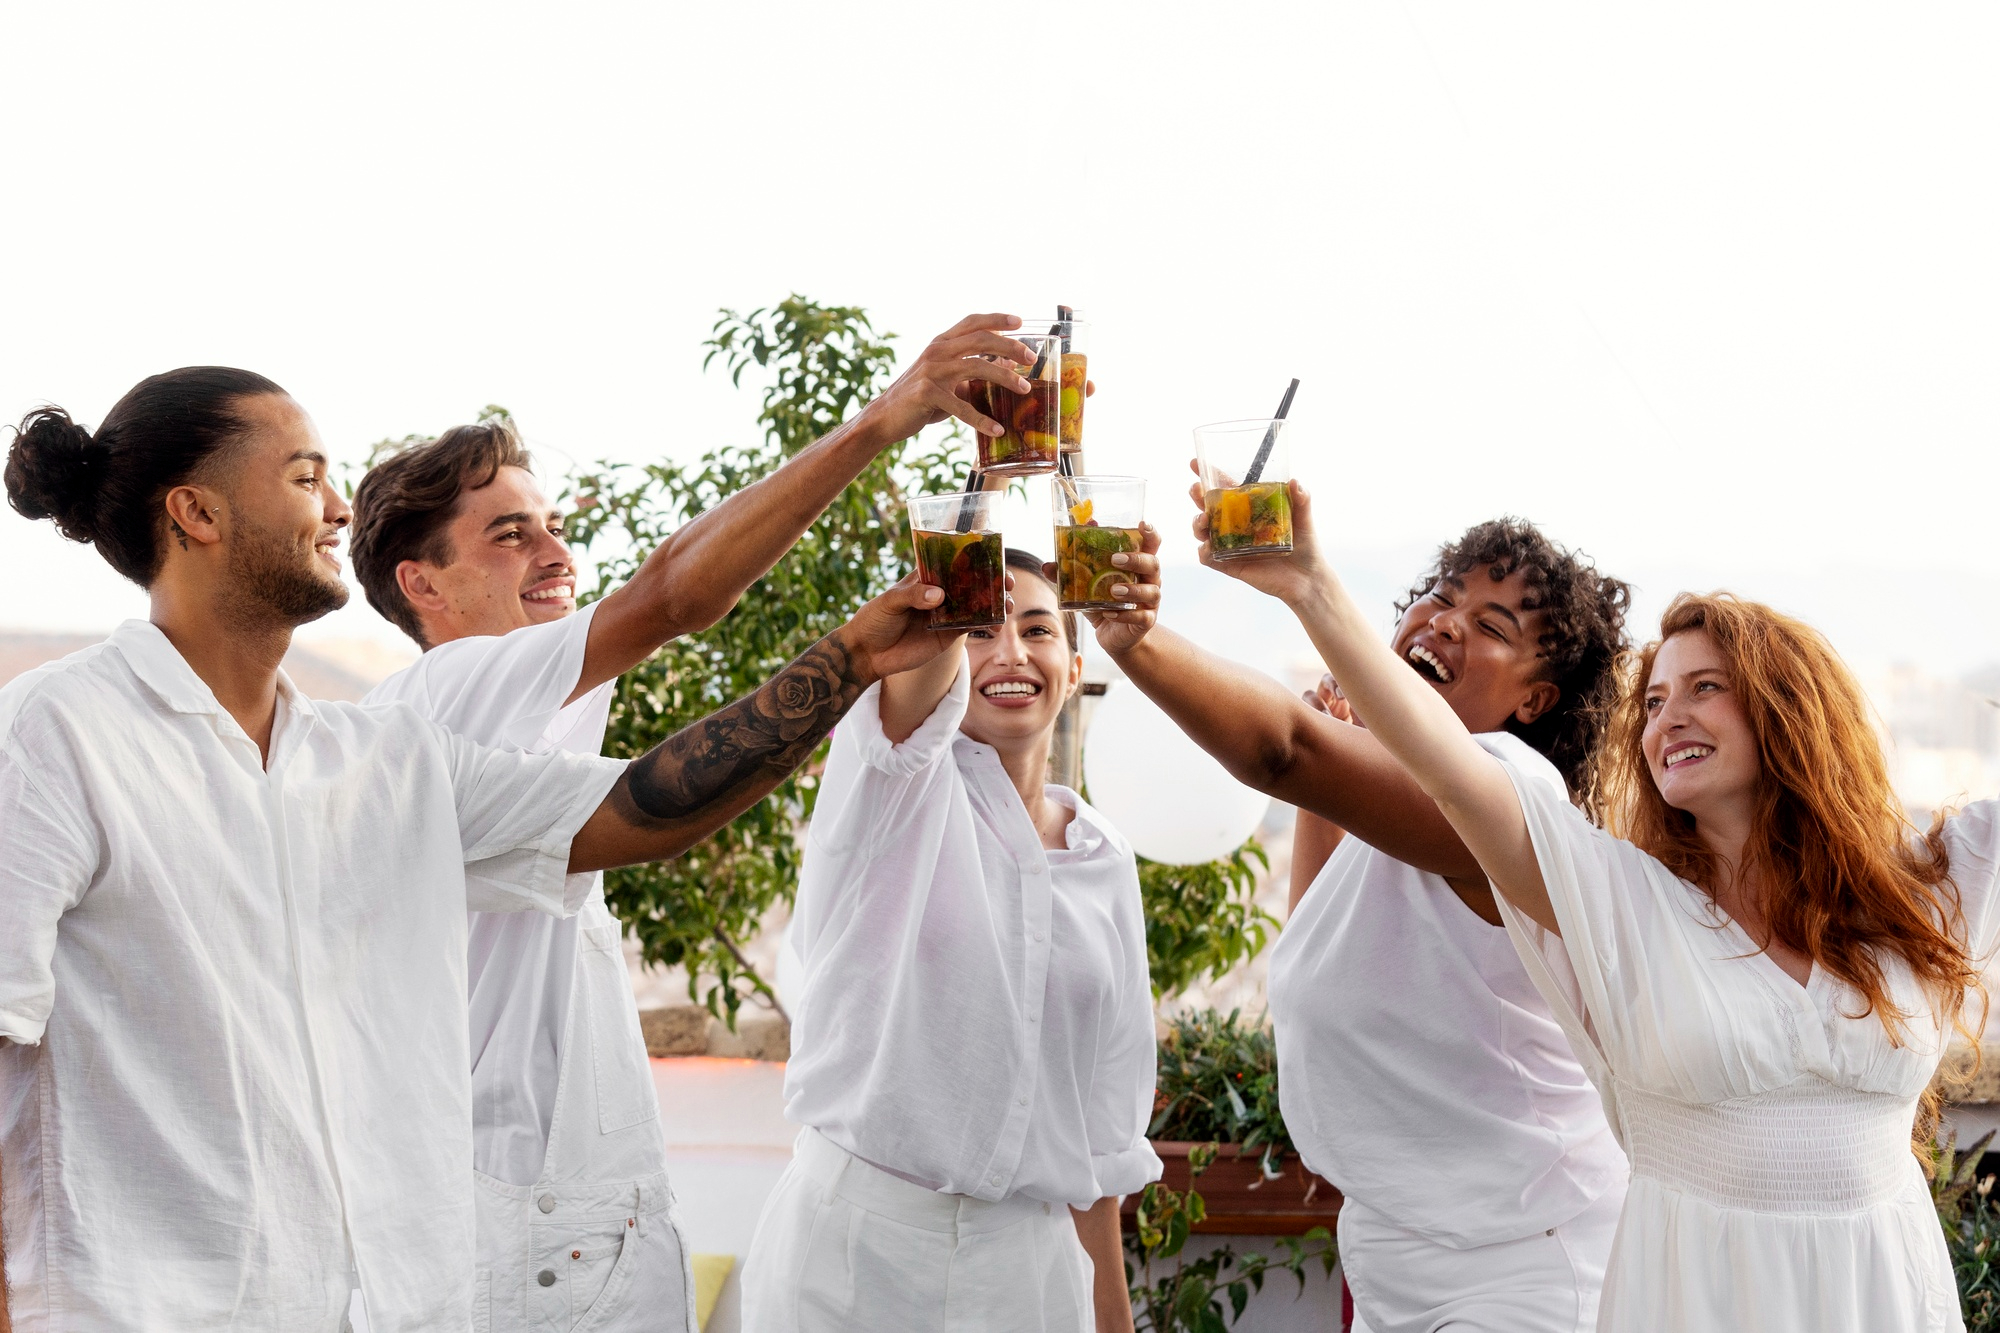 People having a toast at an all-white party | Source: Freepik